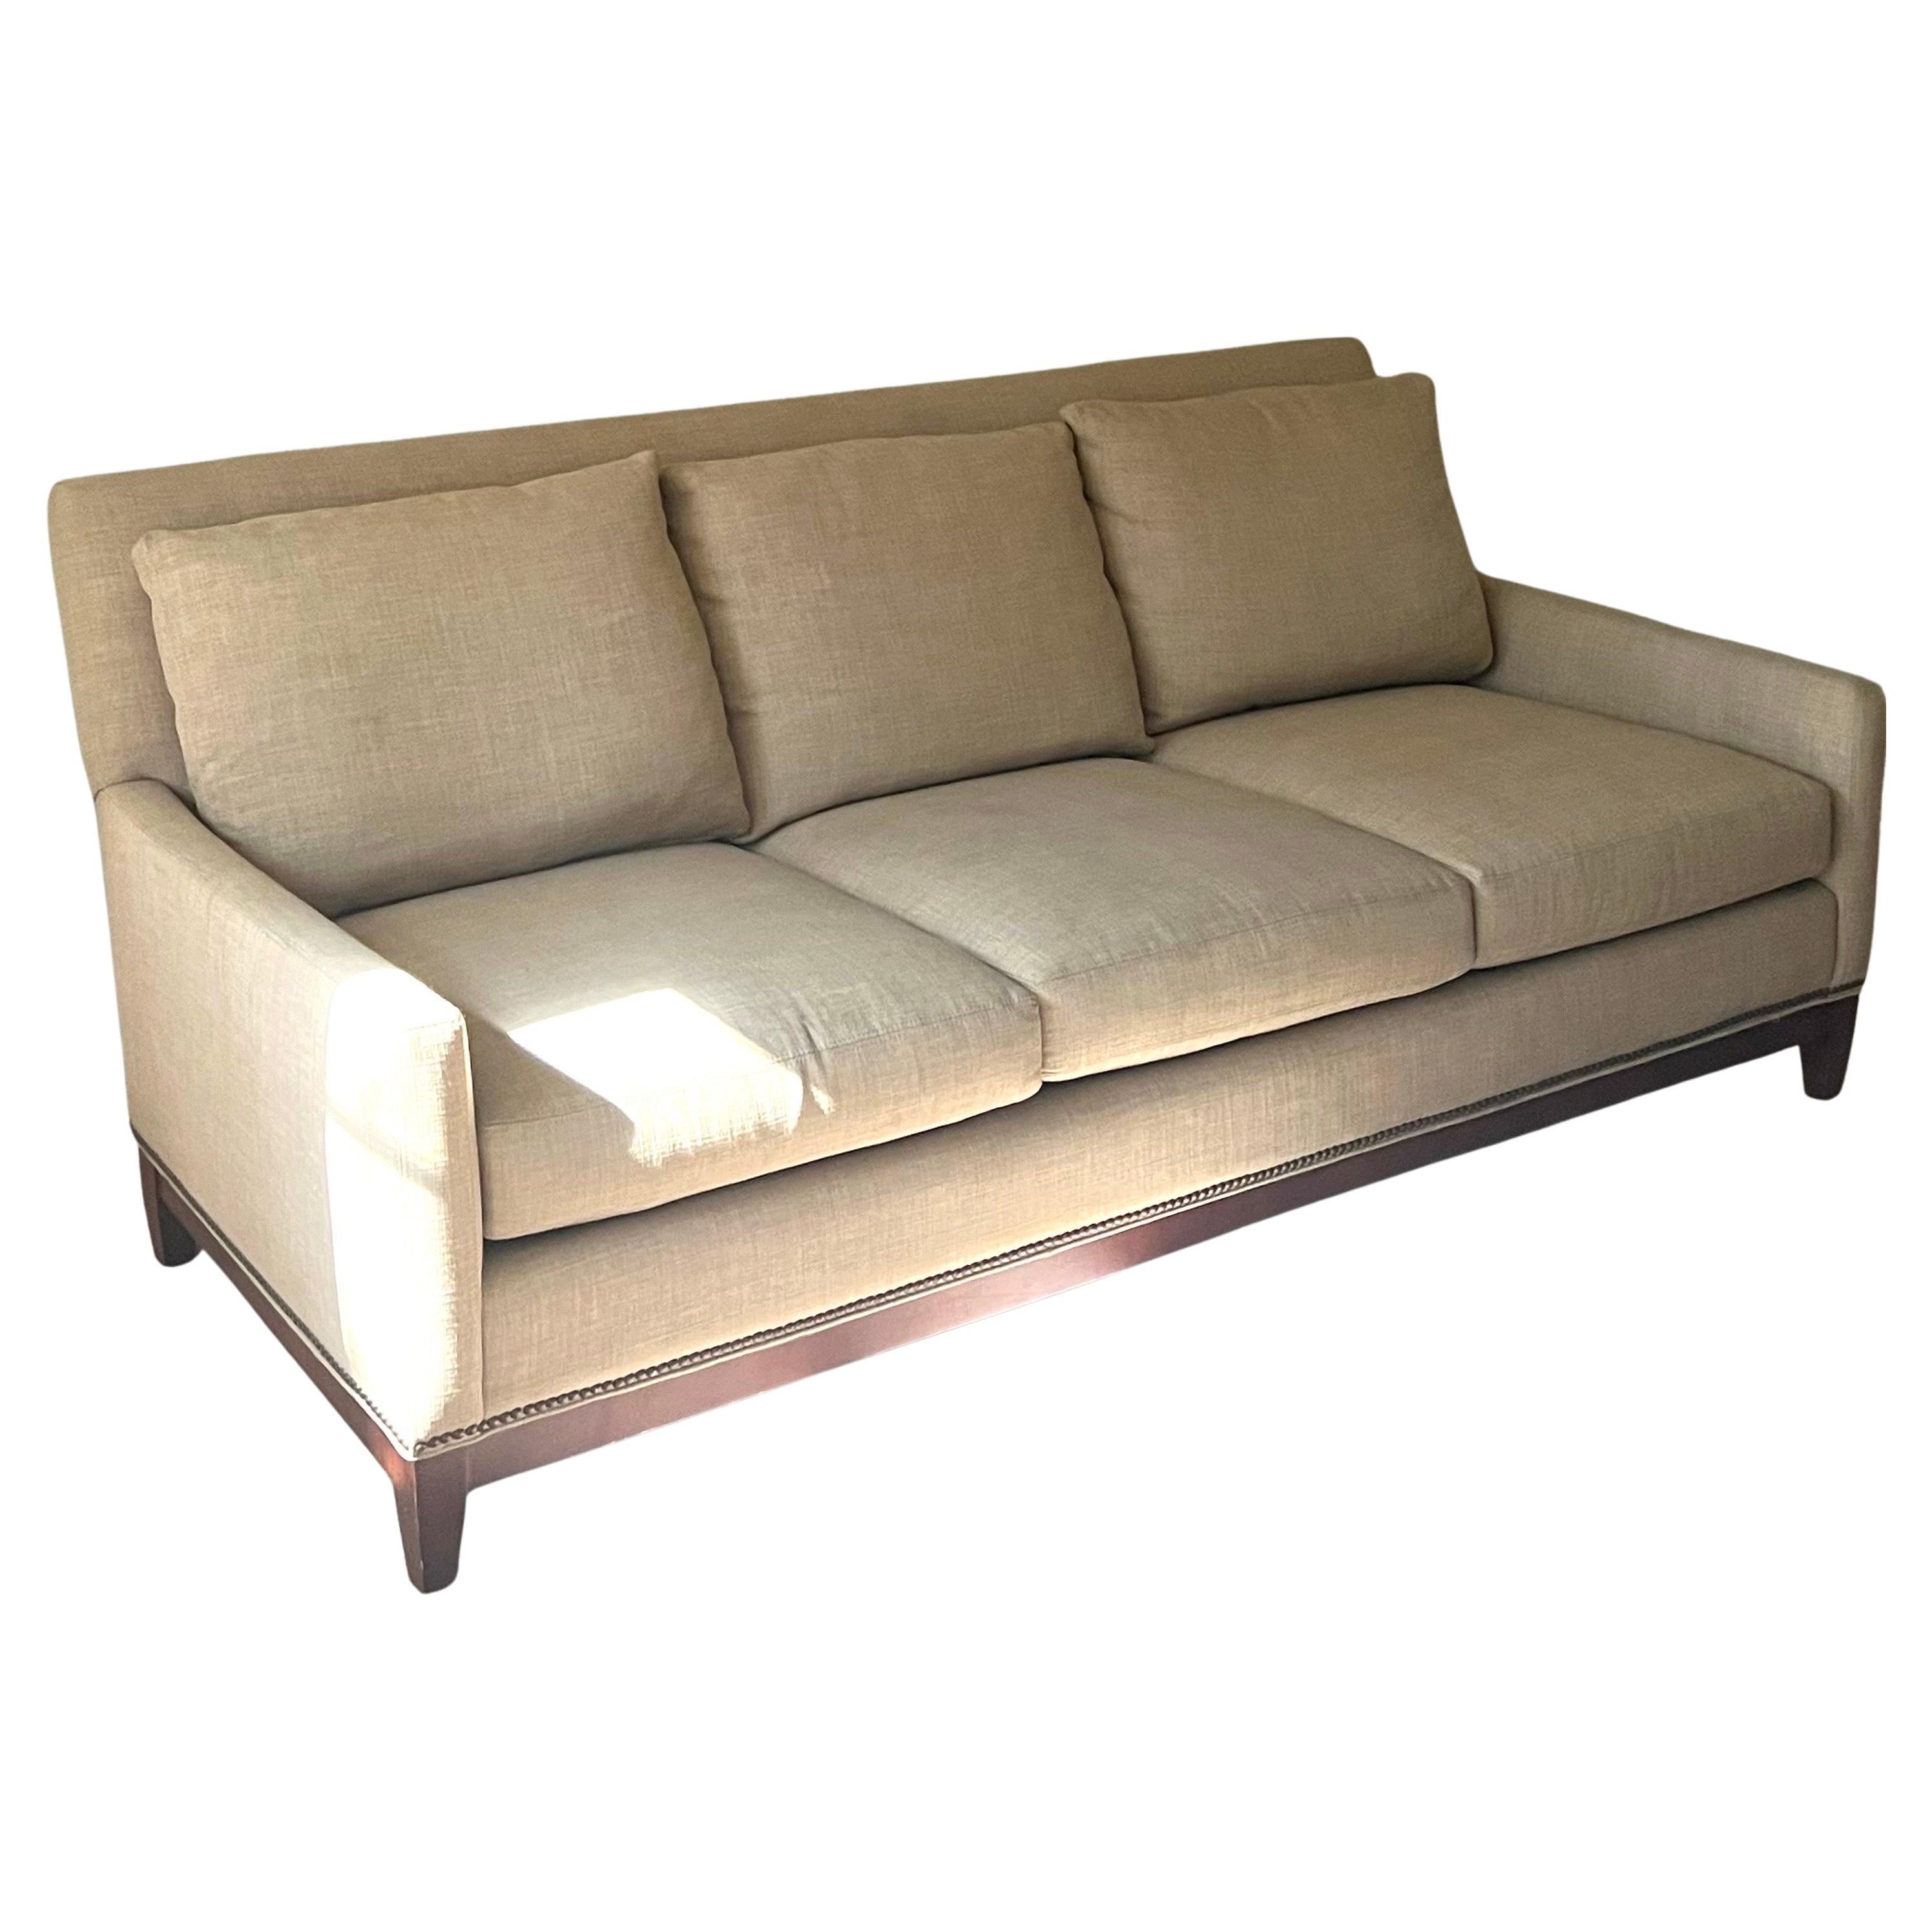 French Mid-Century Modern Style Sofa / Couch in the style of Jean-Michel Frank For Sale